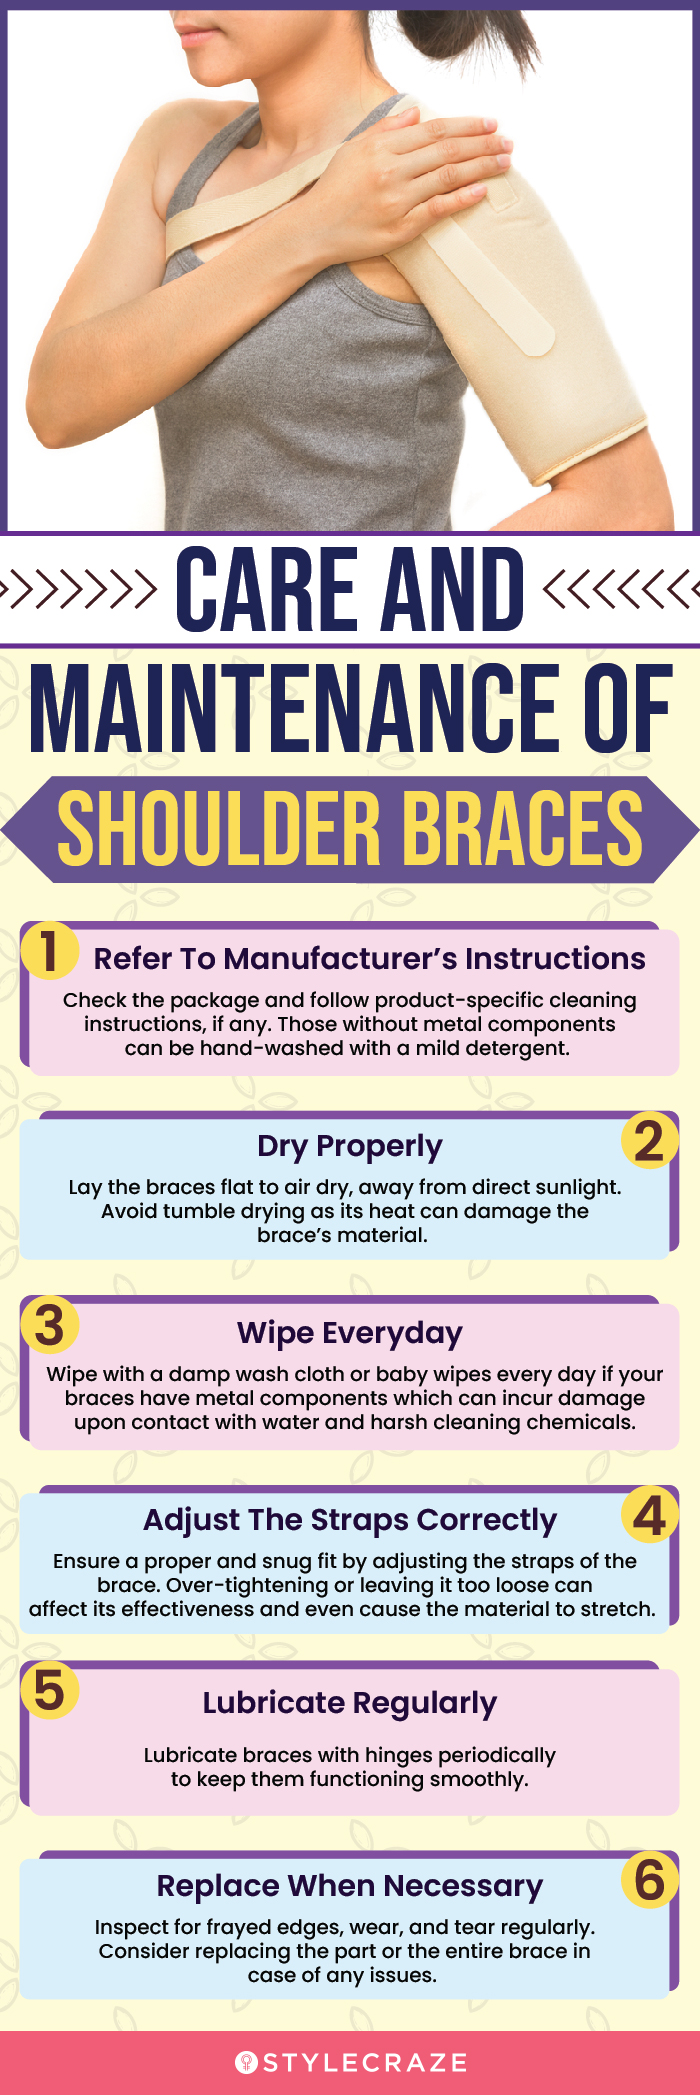 Care And Maintenance Of Shoulder Braces(infographic)